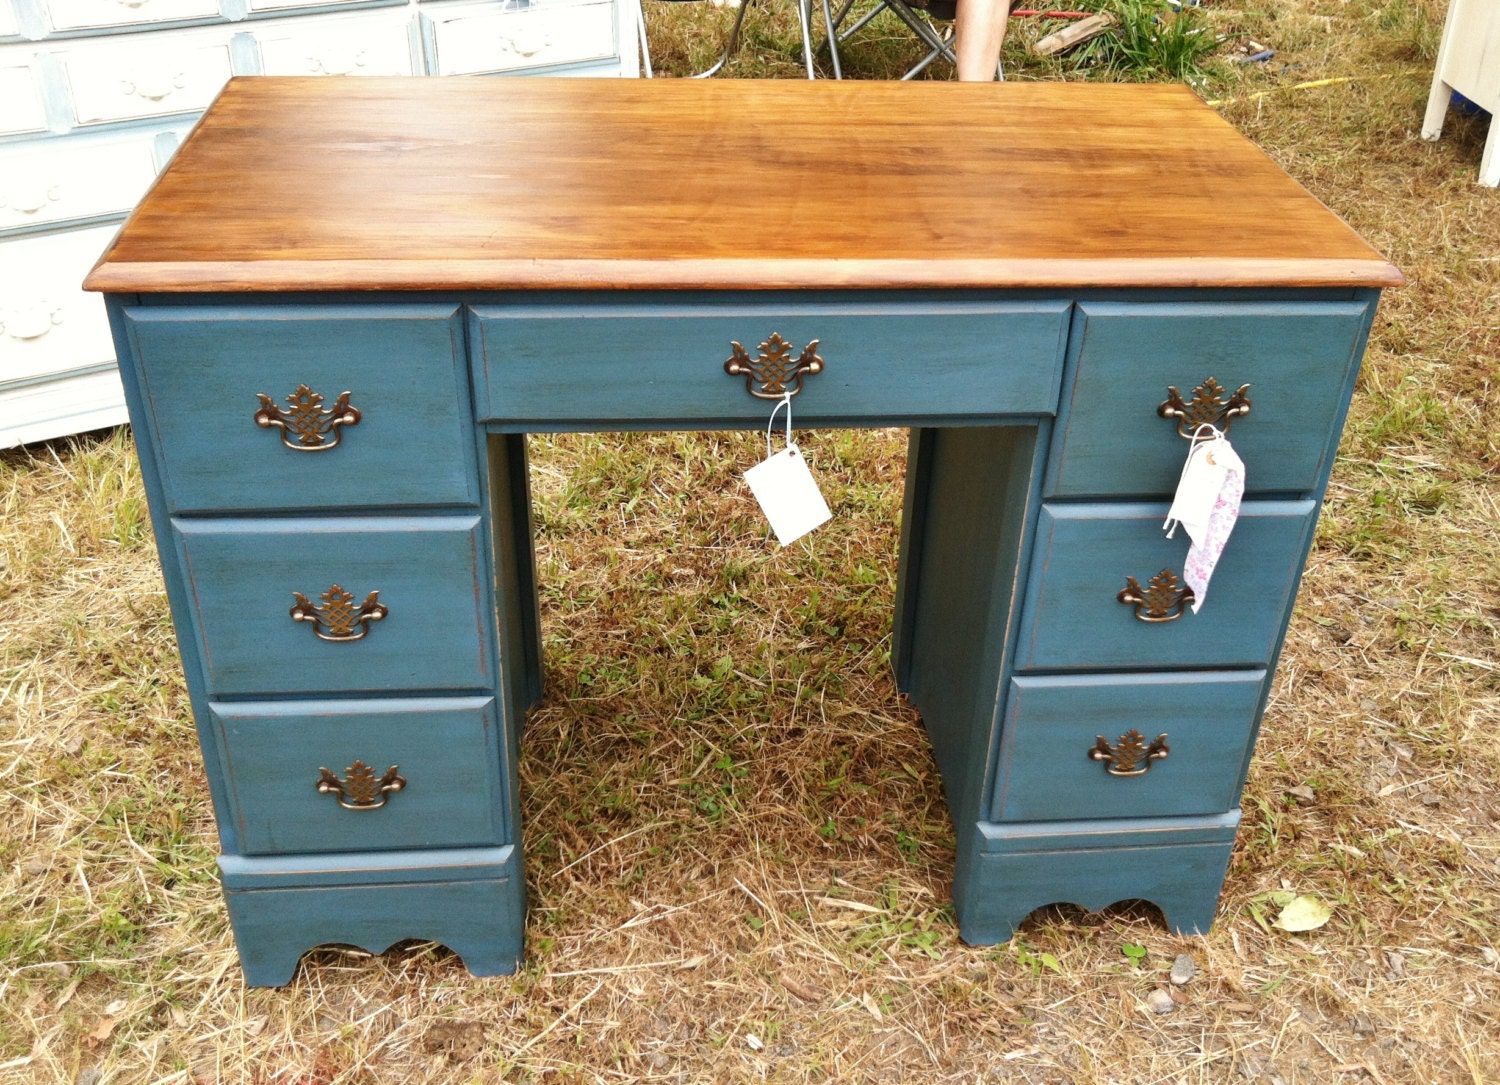 Aubusson Blue Painted Desk With A Wood Stain Top For Blue And White Wood Campaign Desks (View 8 of 15)